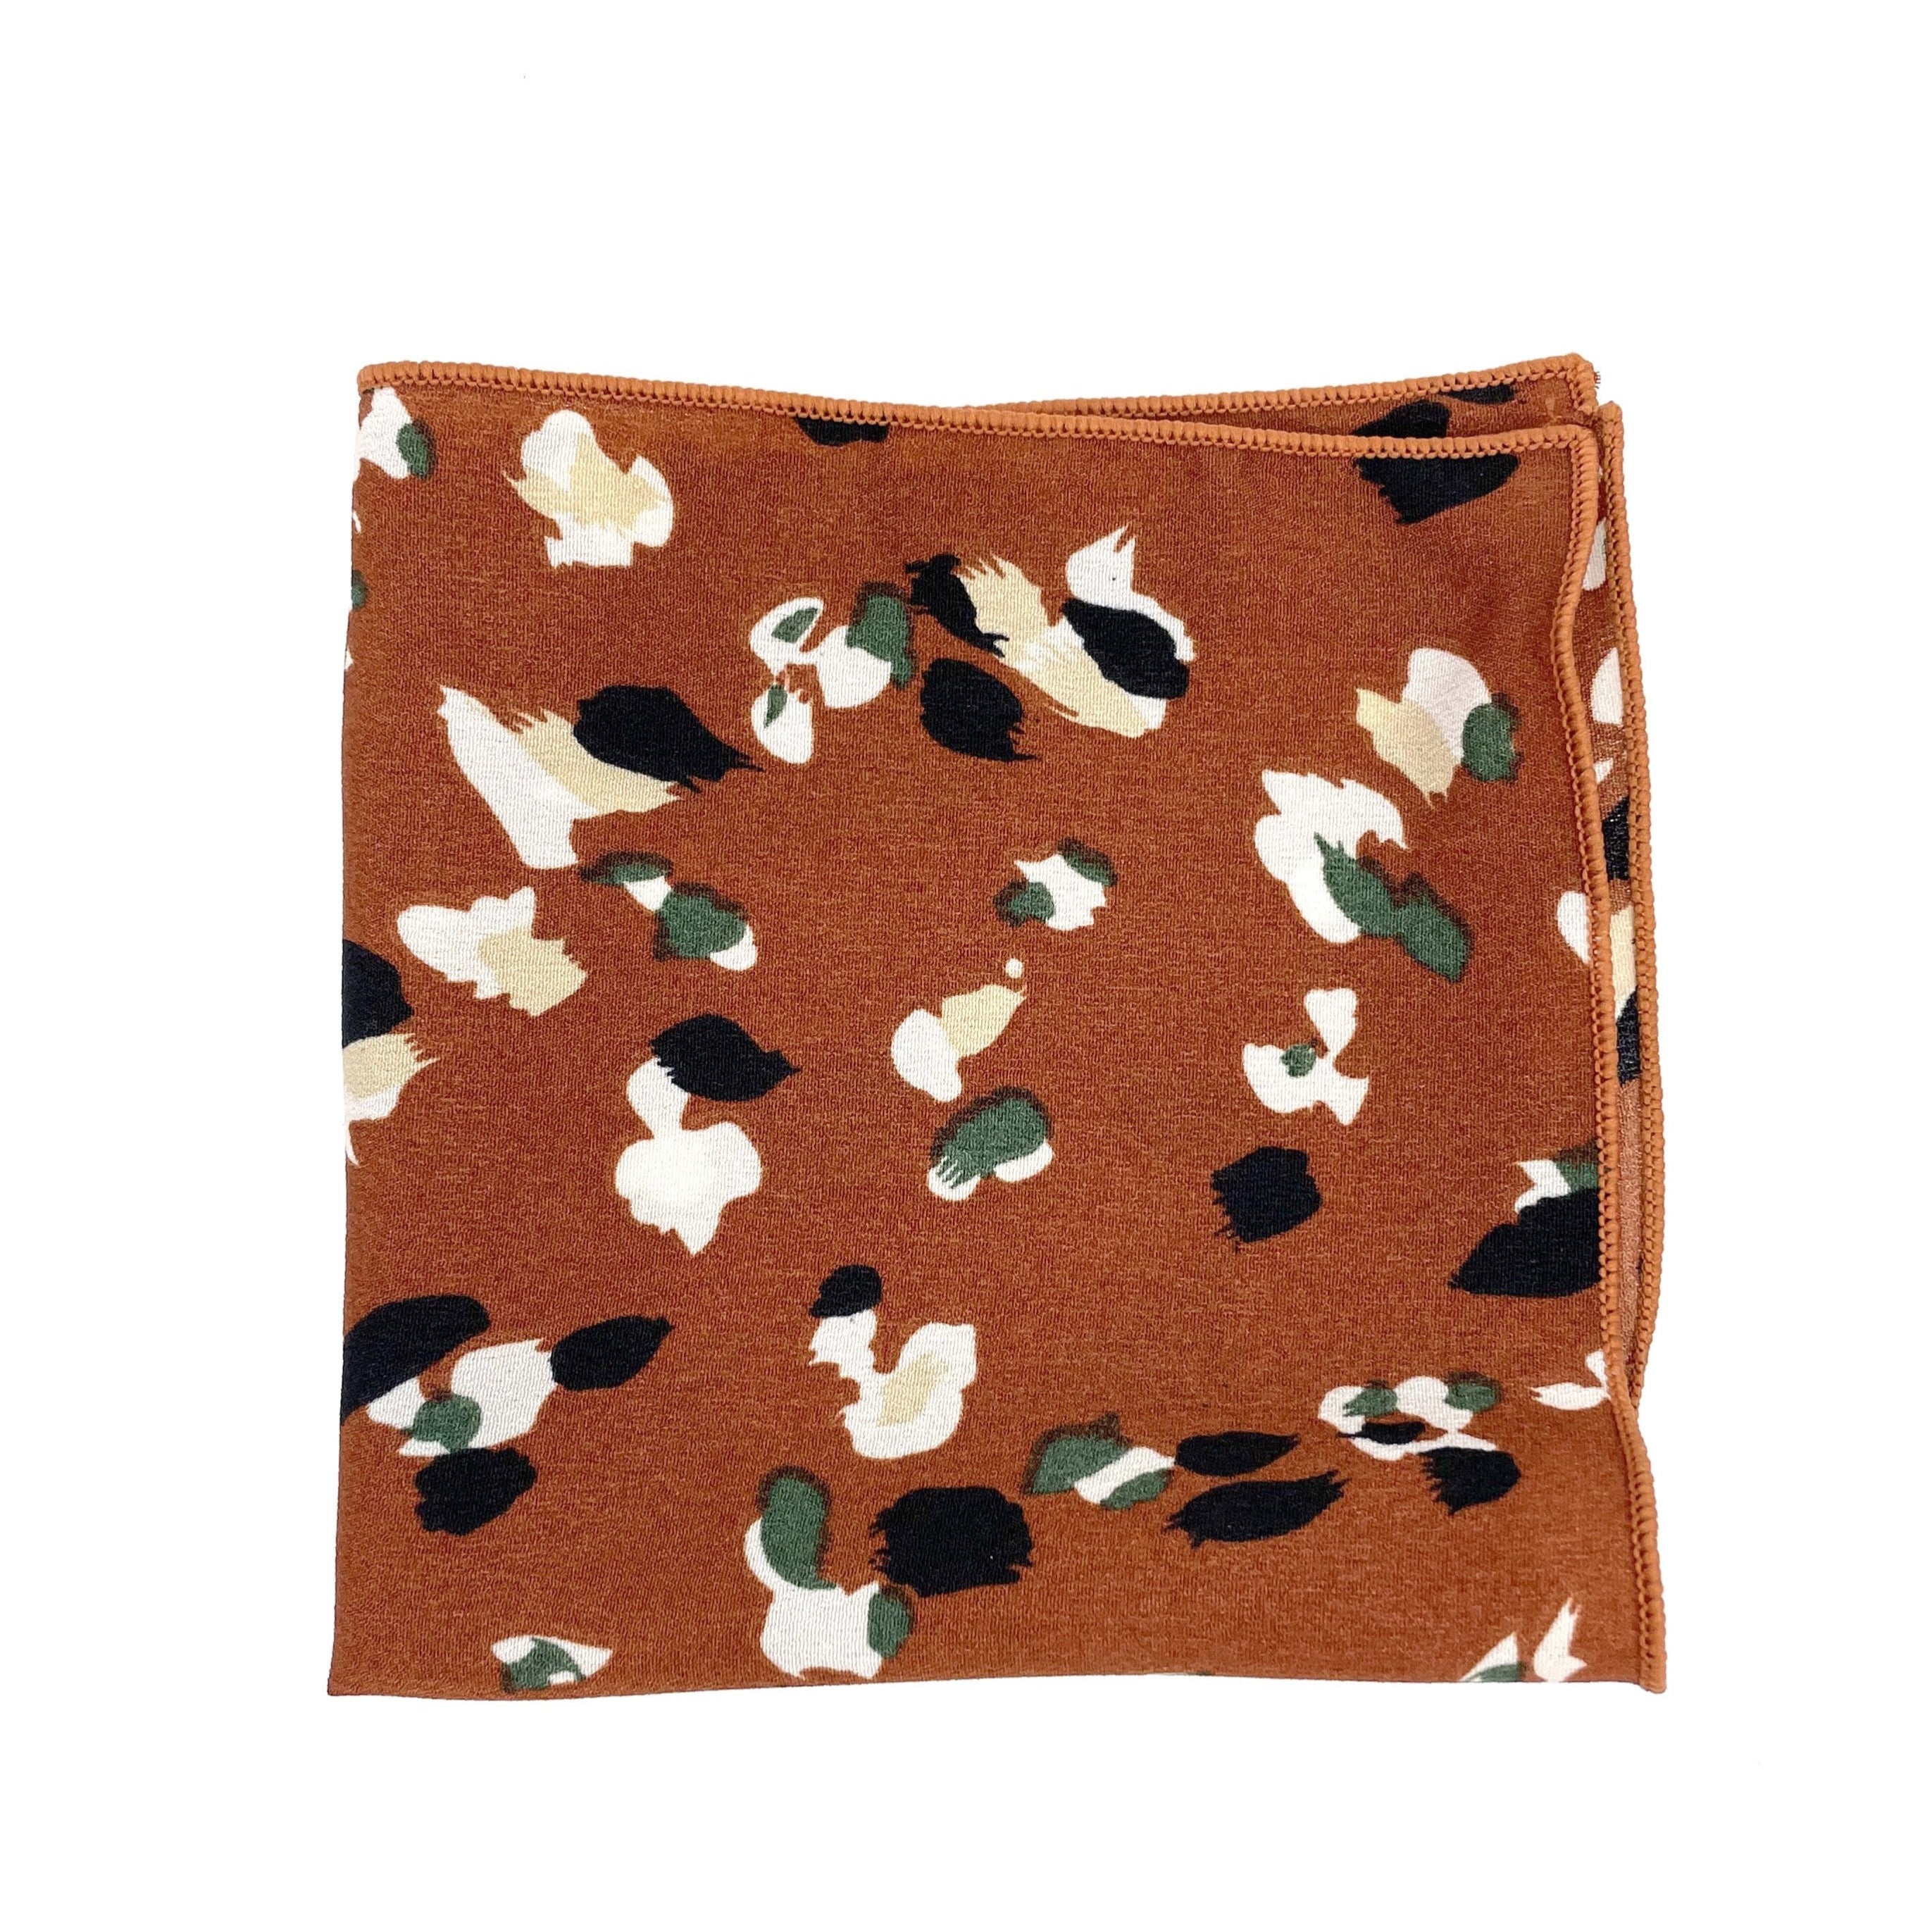 Terracotta Floral Pocket Square - Mytieshop - PHOEBE T Mytieshop Terracotta Floral Pocket Square Material CottonItem Length: 23 cm ( 9 inches)Item Width : 22 cm (8.6 inches) Color: Terracotta The PHOEBE is the perfect accessory to add a touch of elegance to your outfit. Made of 100% Silk, this pocket square is sure to make a statement. The intricate floral design is eye-catching and will surely turn heads. Whether you&#39;re dressing up for a special occasion or simply want to add a touch of sophist